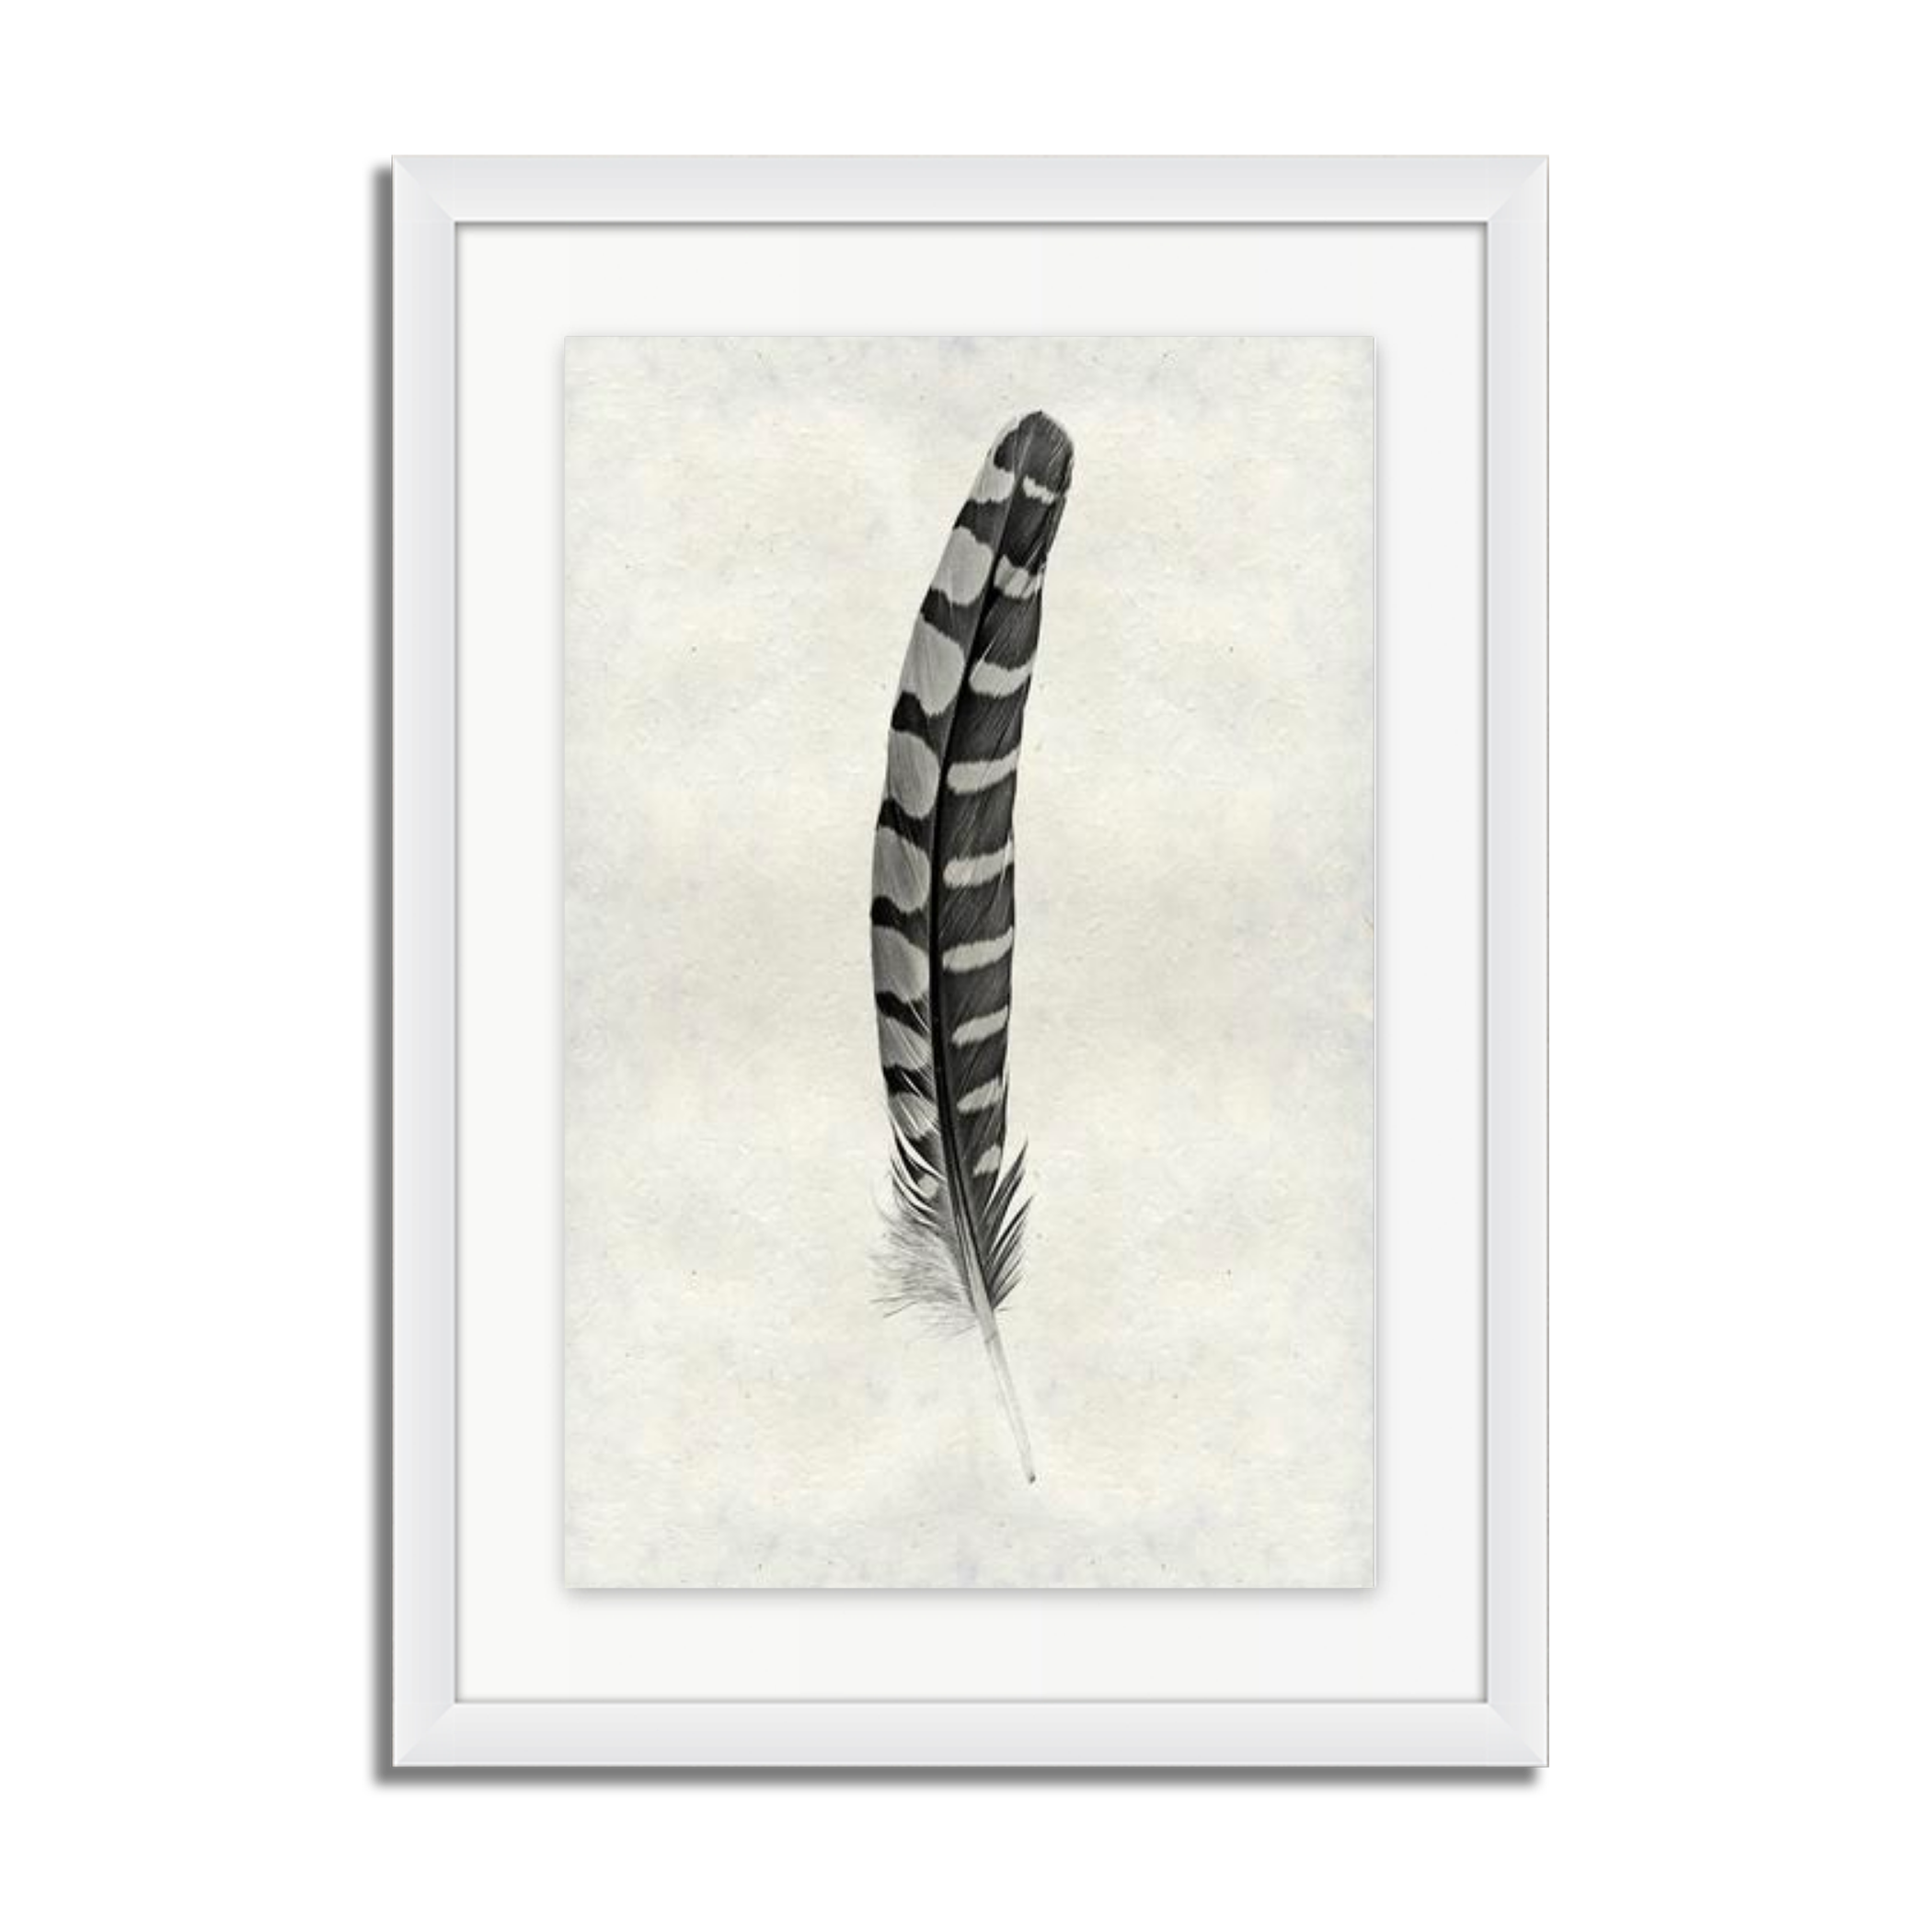 Feather Study #12 (Partridge Wing)